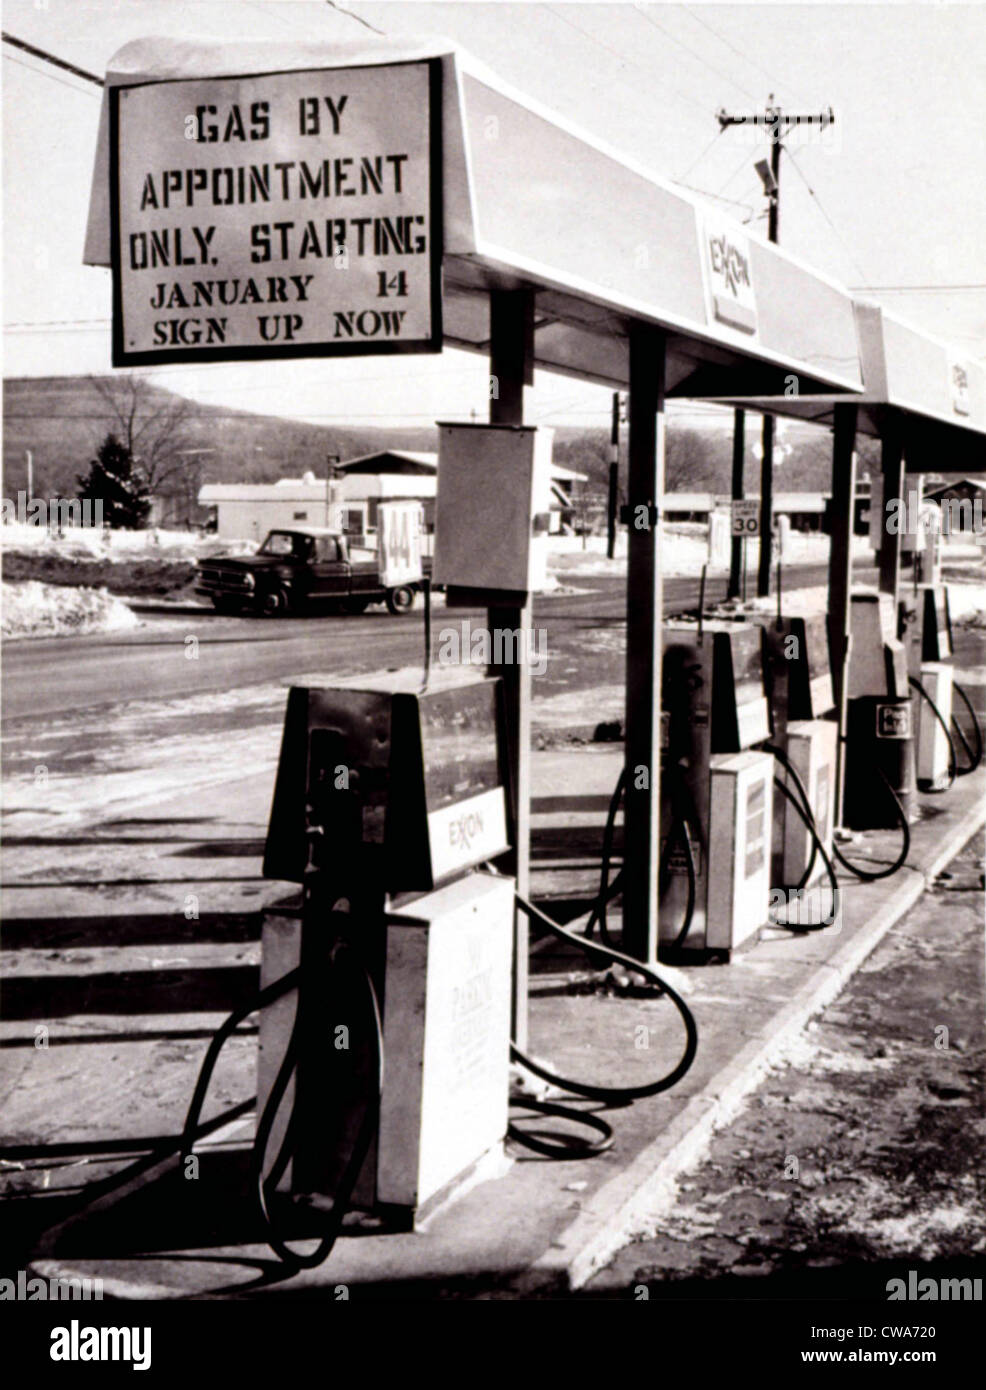 GAS SHORTAGE-A gas station in Amherst, Mass., during the gas shortage, 1/15/74.. Courtesy: CSU Archives / Everett Collection Stock Photo